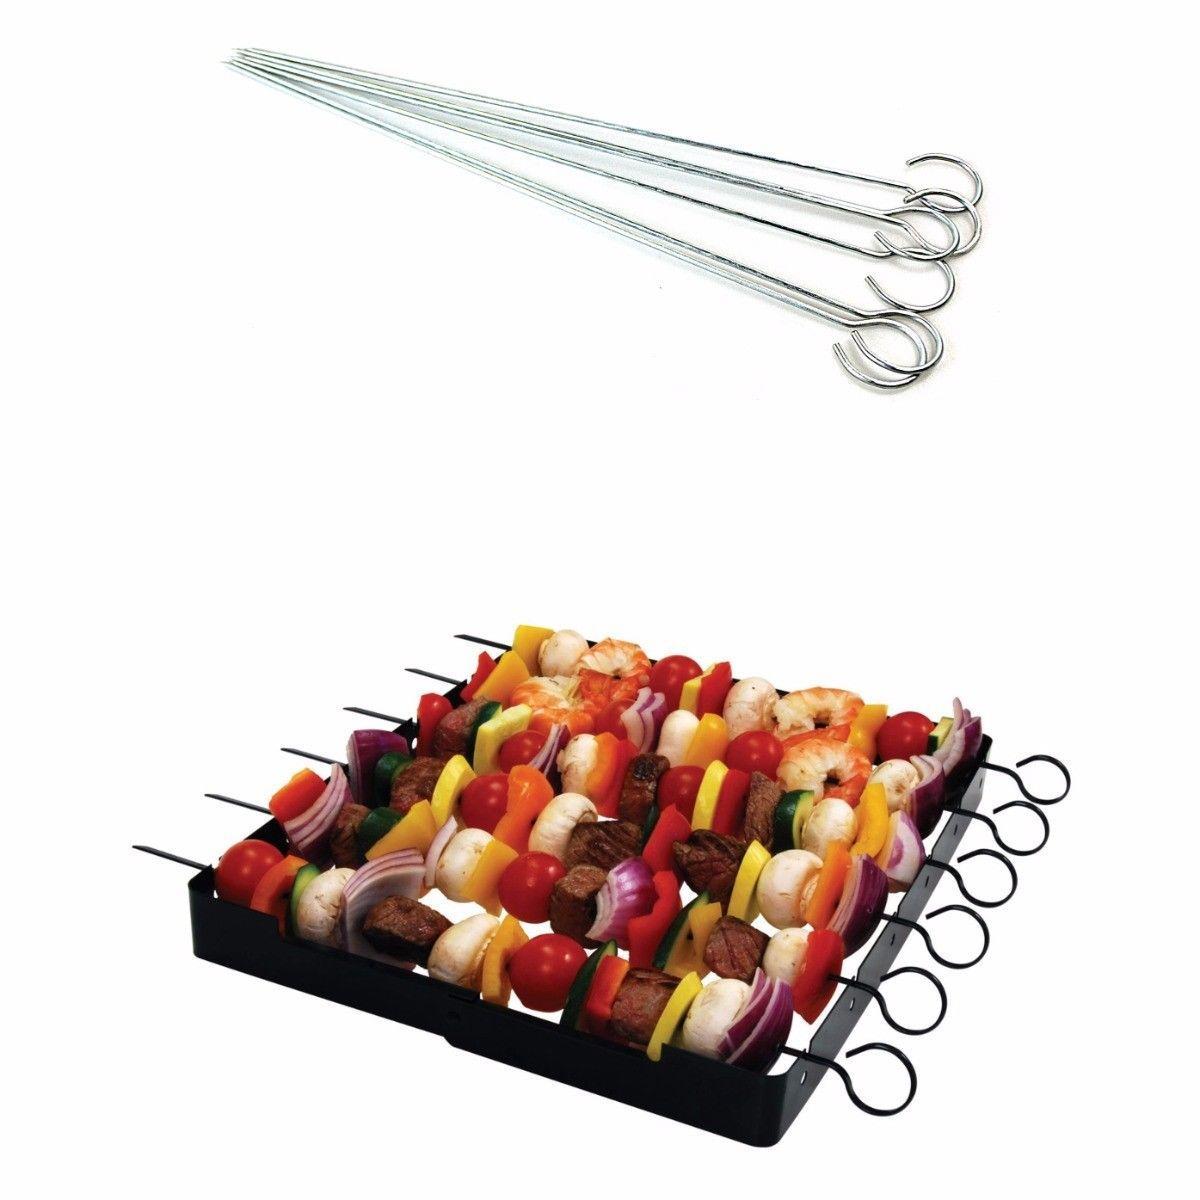 6 Pack 30cm Barbeque Skewers Stainless Steel Flat For Meat Veg Kebabs & Fruit Outdoors 3482 (Parcel Rate)